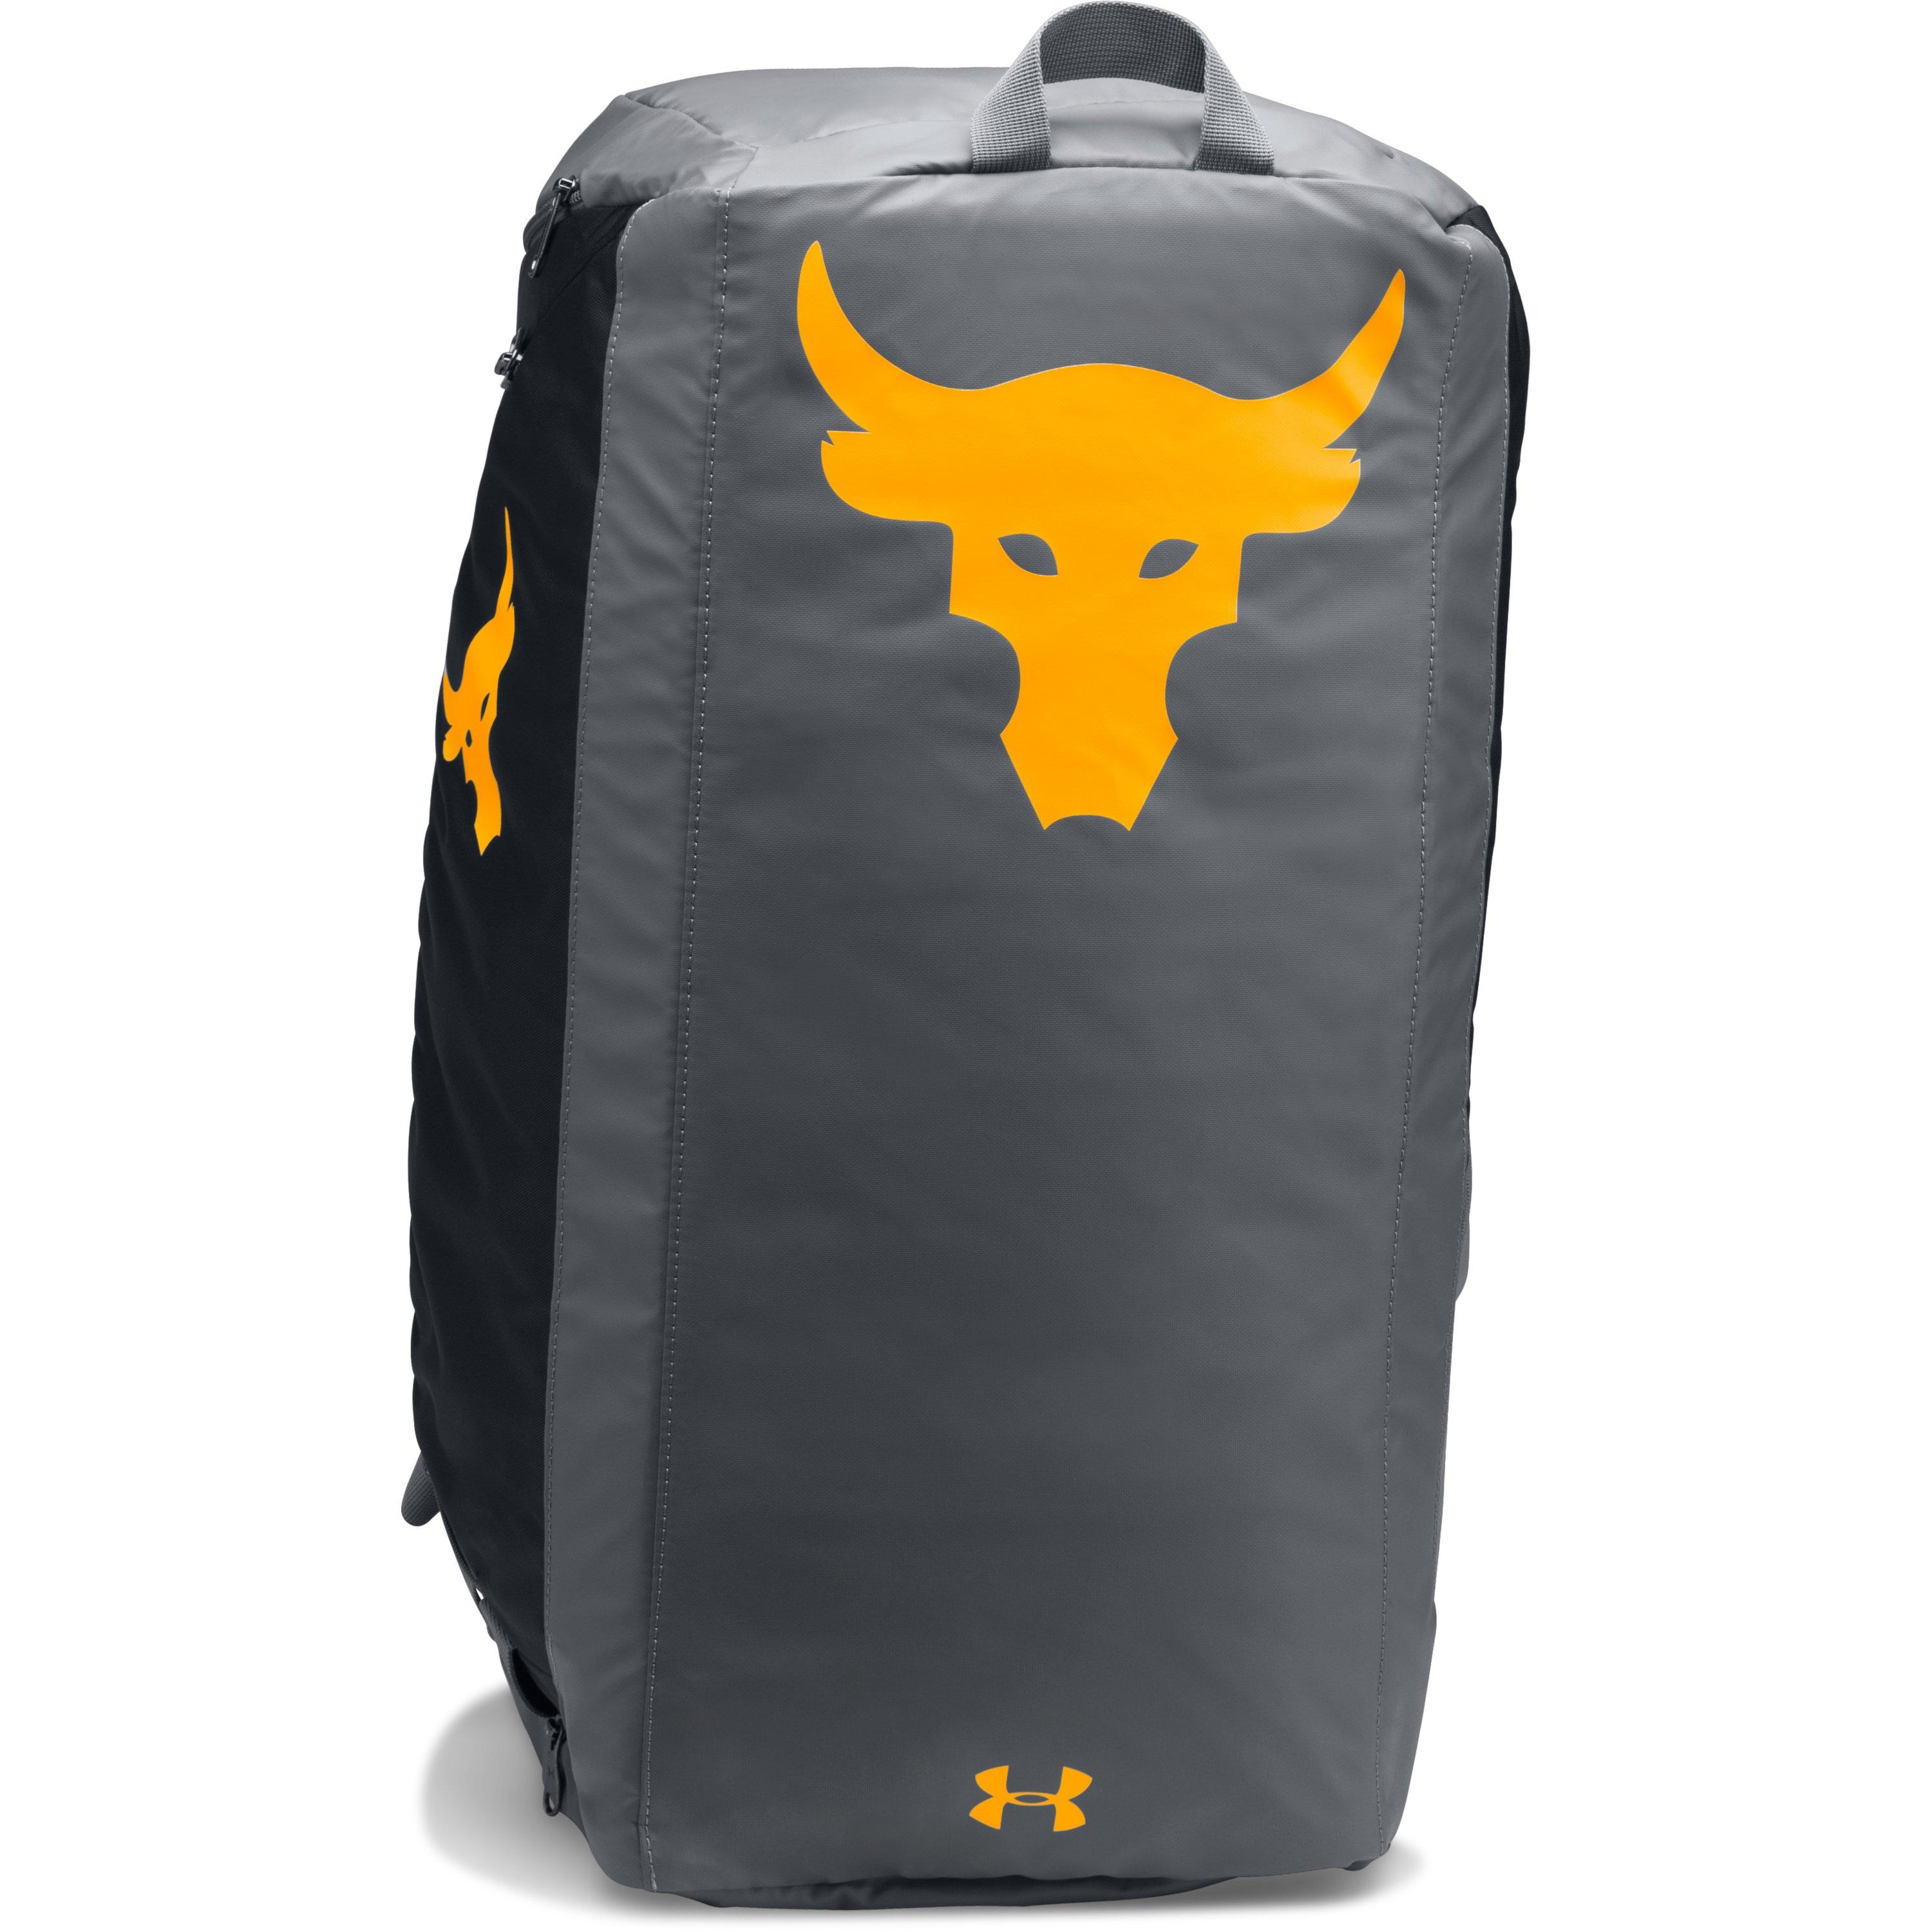 Under Armour Ua X Project Rock Contain Backpack Duffle 3.0 in Black  /Graphite (Black) for Men - Lyst